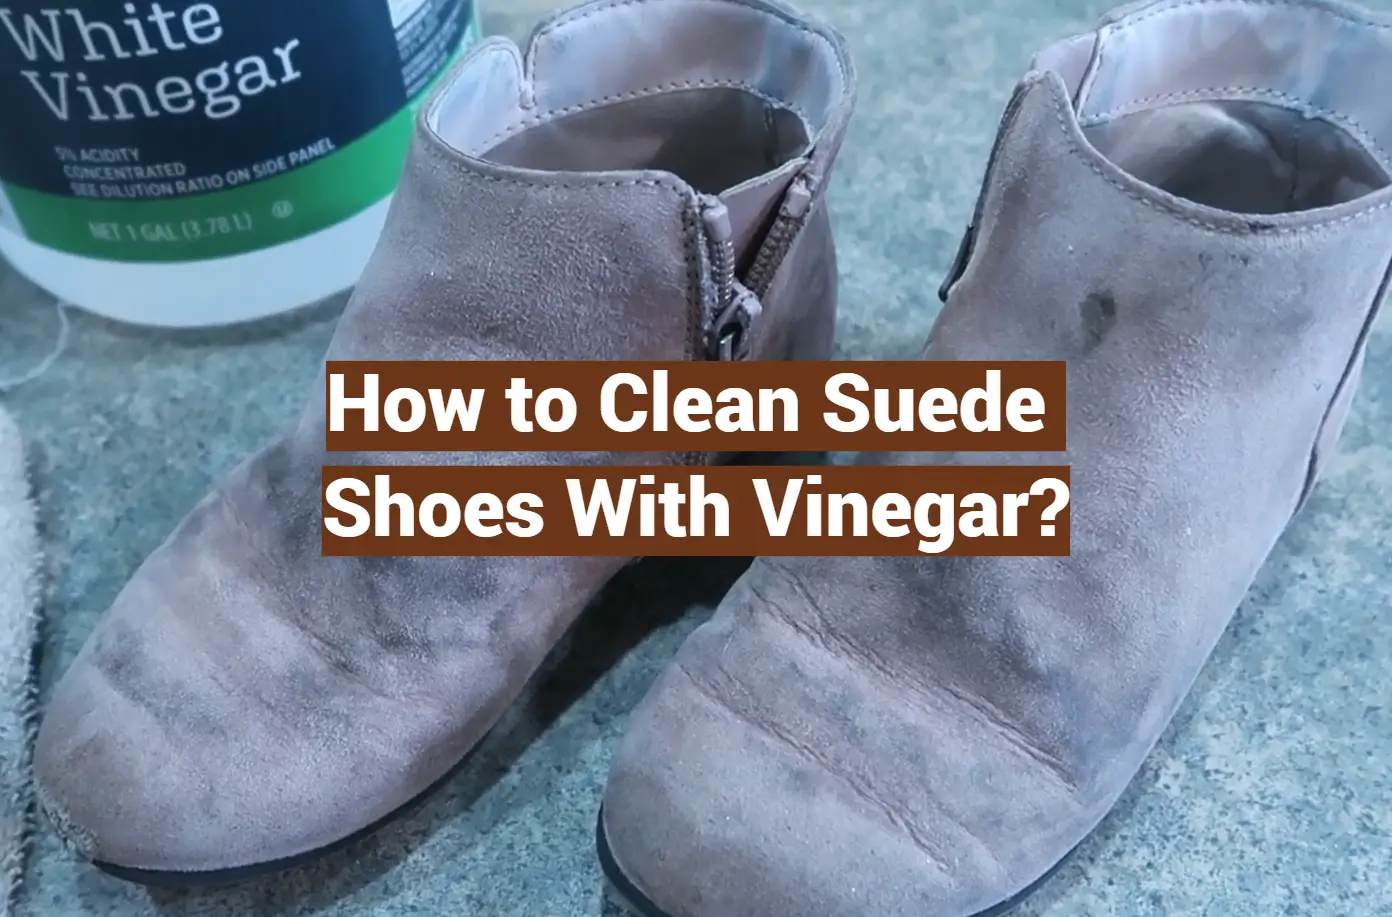 How to Clean Suede Shoes With Vinegar?